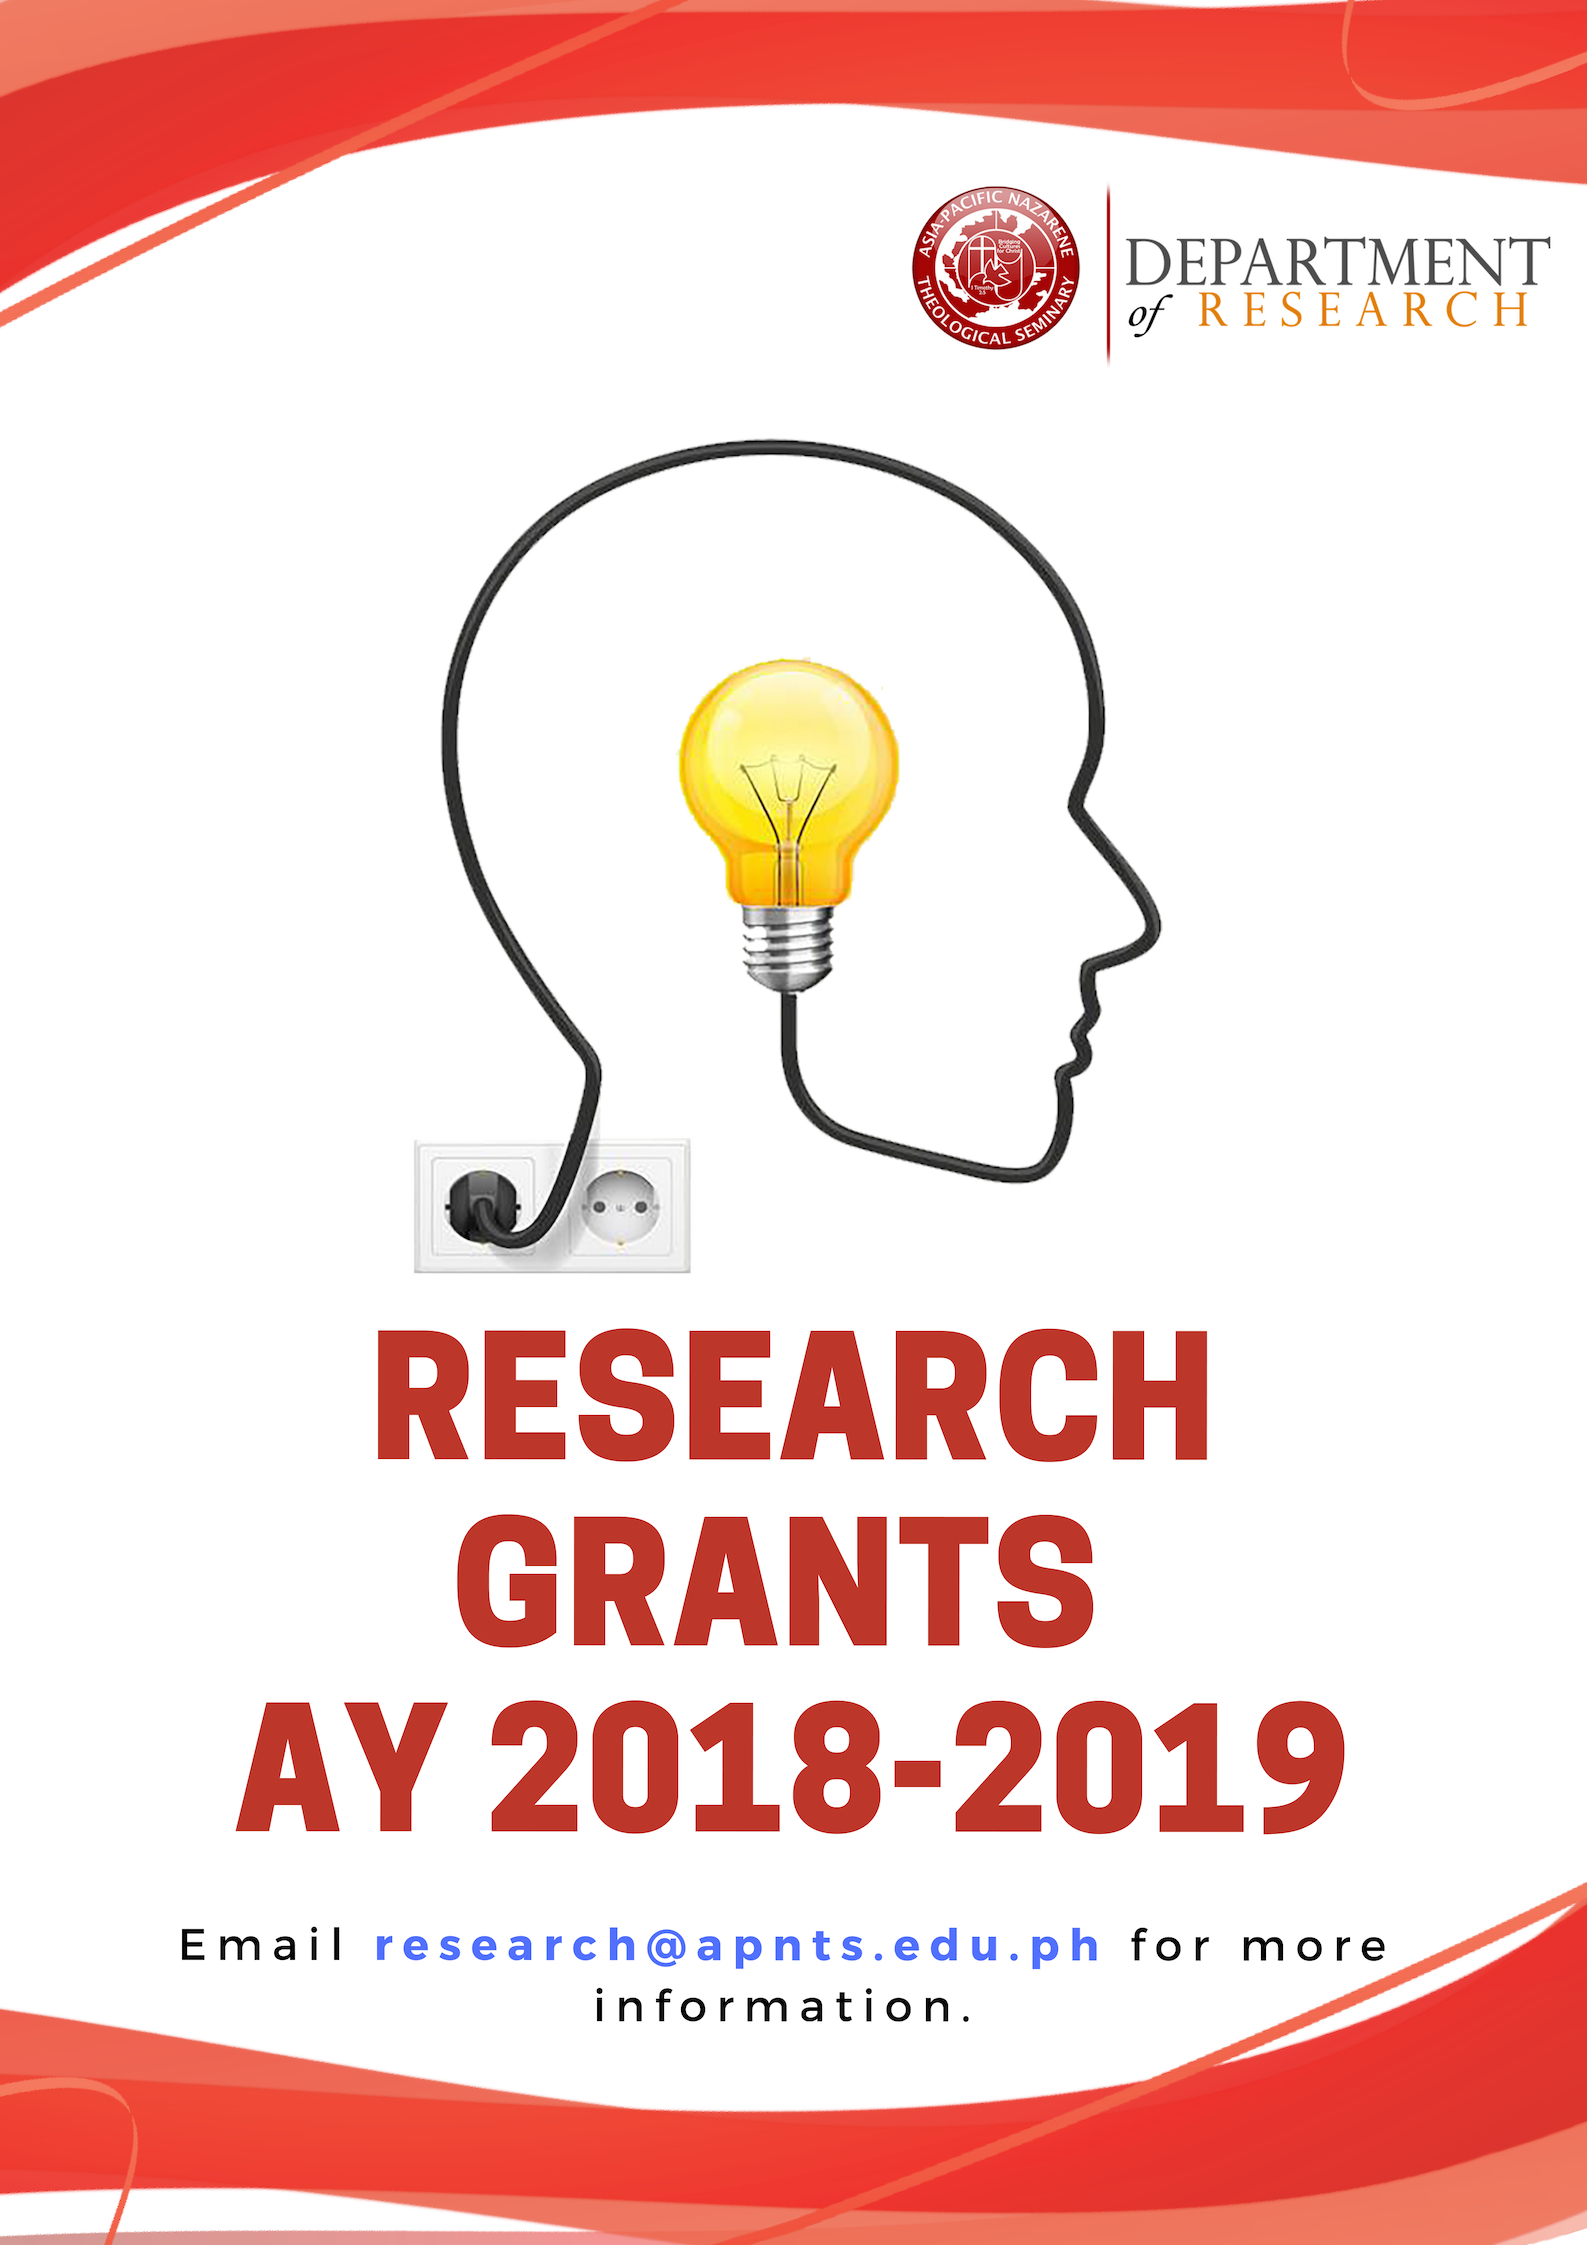 Apply for Research Grants AY 2018-2019